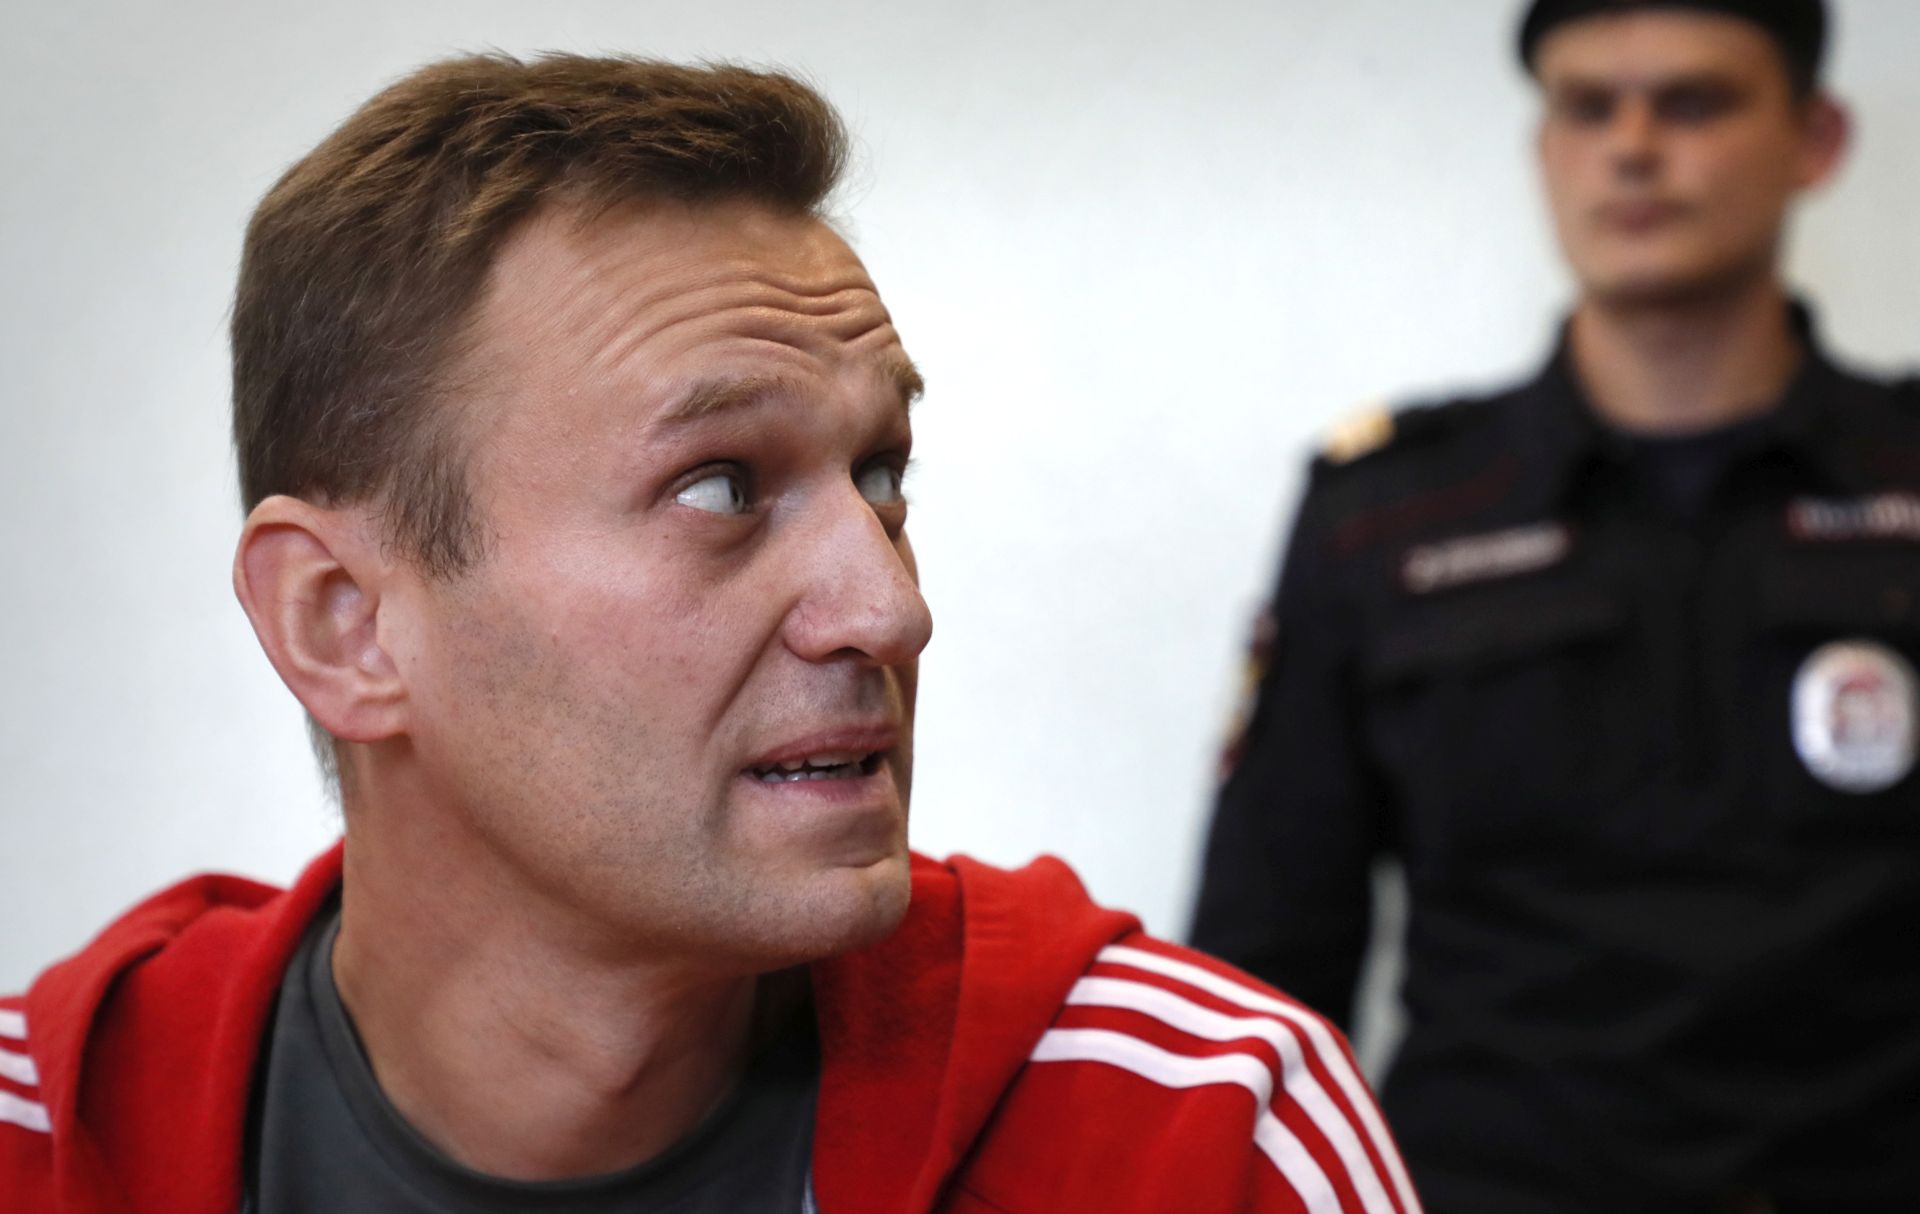 epa08090625 (FILE) - Russian opposition leader Alexei Navalny (L) attends a hearing at the Simonovsky District court in Moscow, Russia, 22 August 2019 (reissued 26 December 2019). According to media reports, Navalny was once again arrested on 26 December after Russian authorities raided the headquarters of his Anti-Corruption Foundation (FBK) in Moscow. Navalny's detention comes after one of his allies, Ruslan Shaveddinov, was forcibly sent to serve in the military at a remote outpost in the arctic on 23 December.  EPA/YURI KOCHETKOV